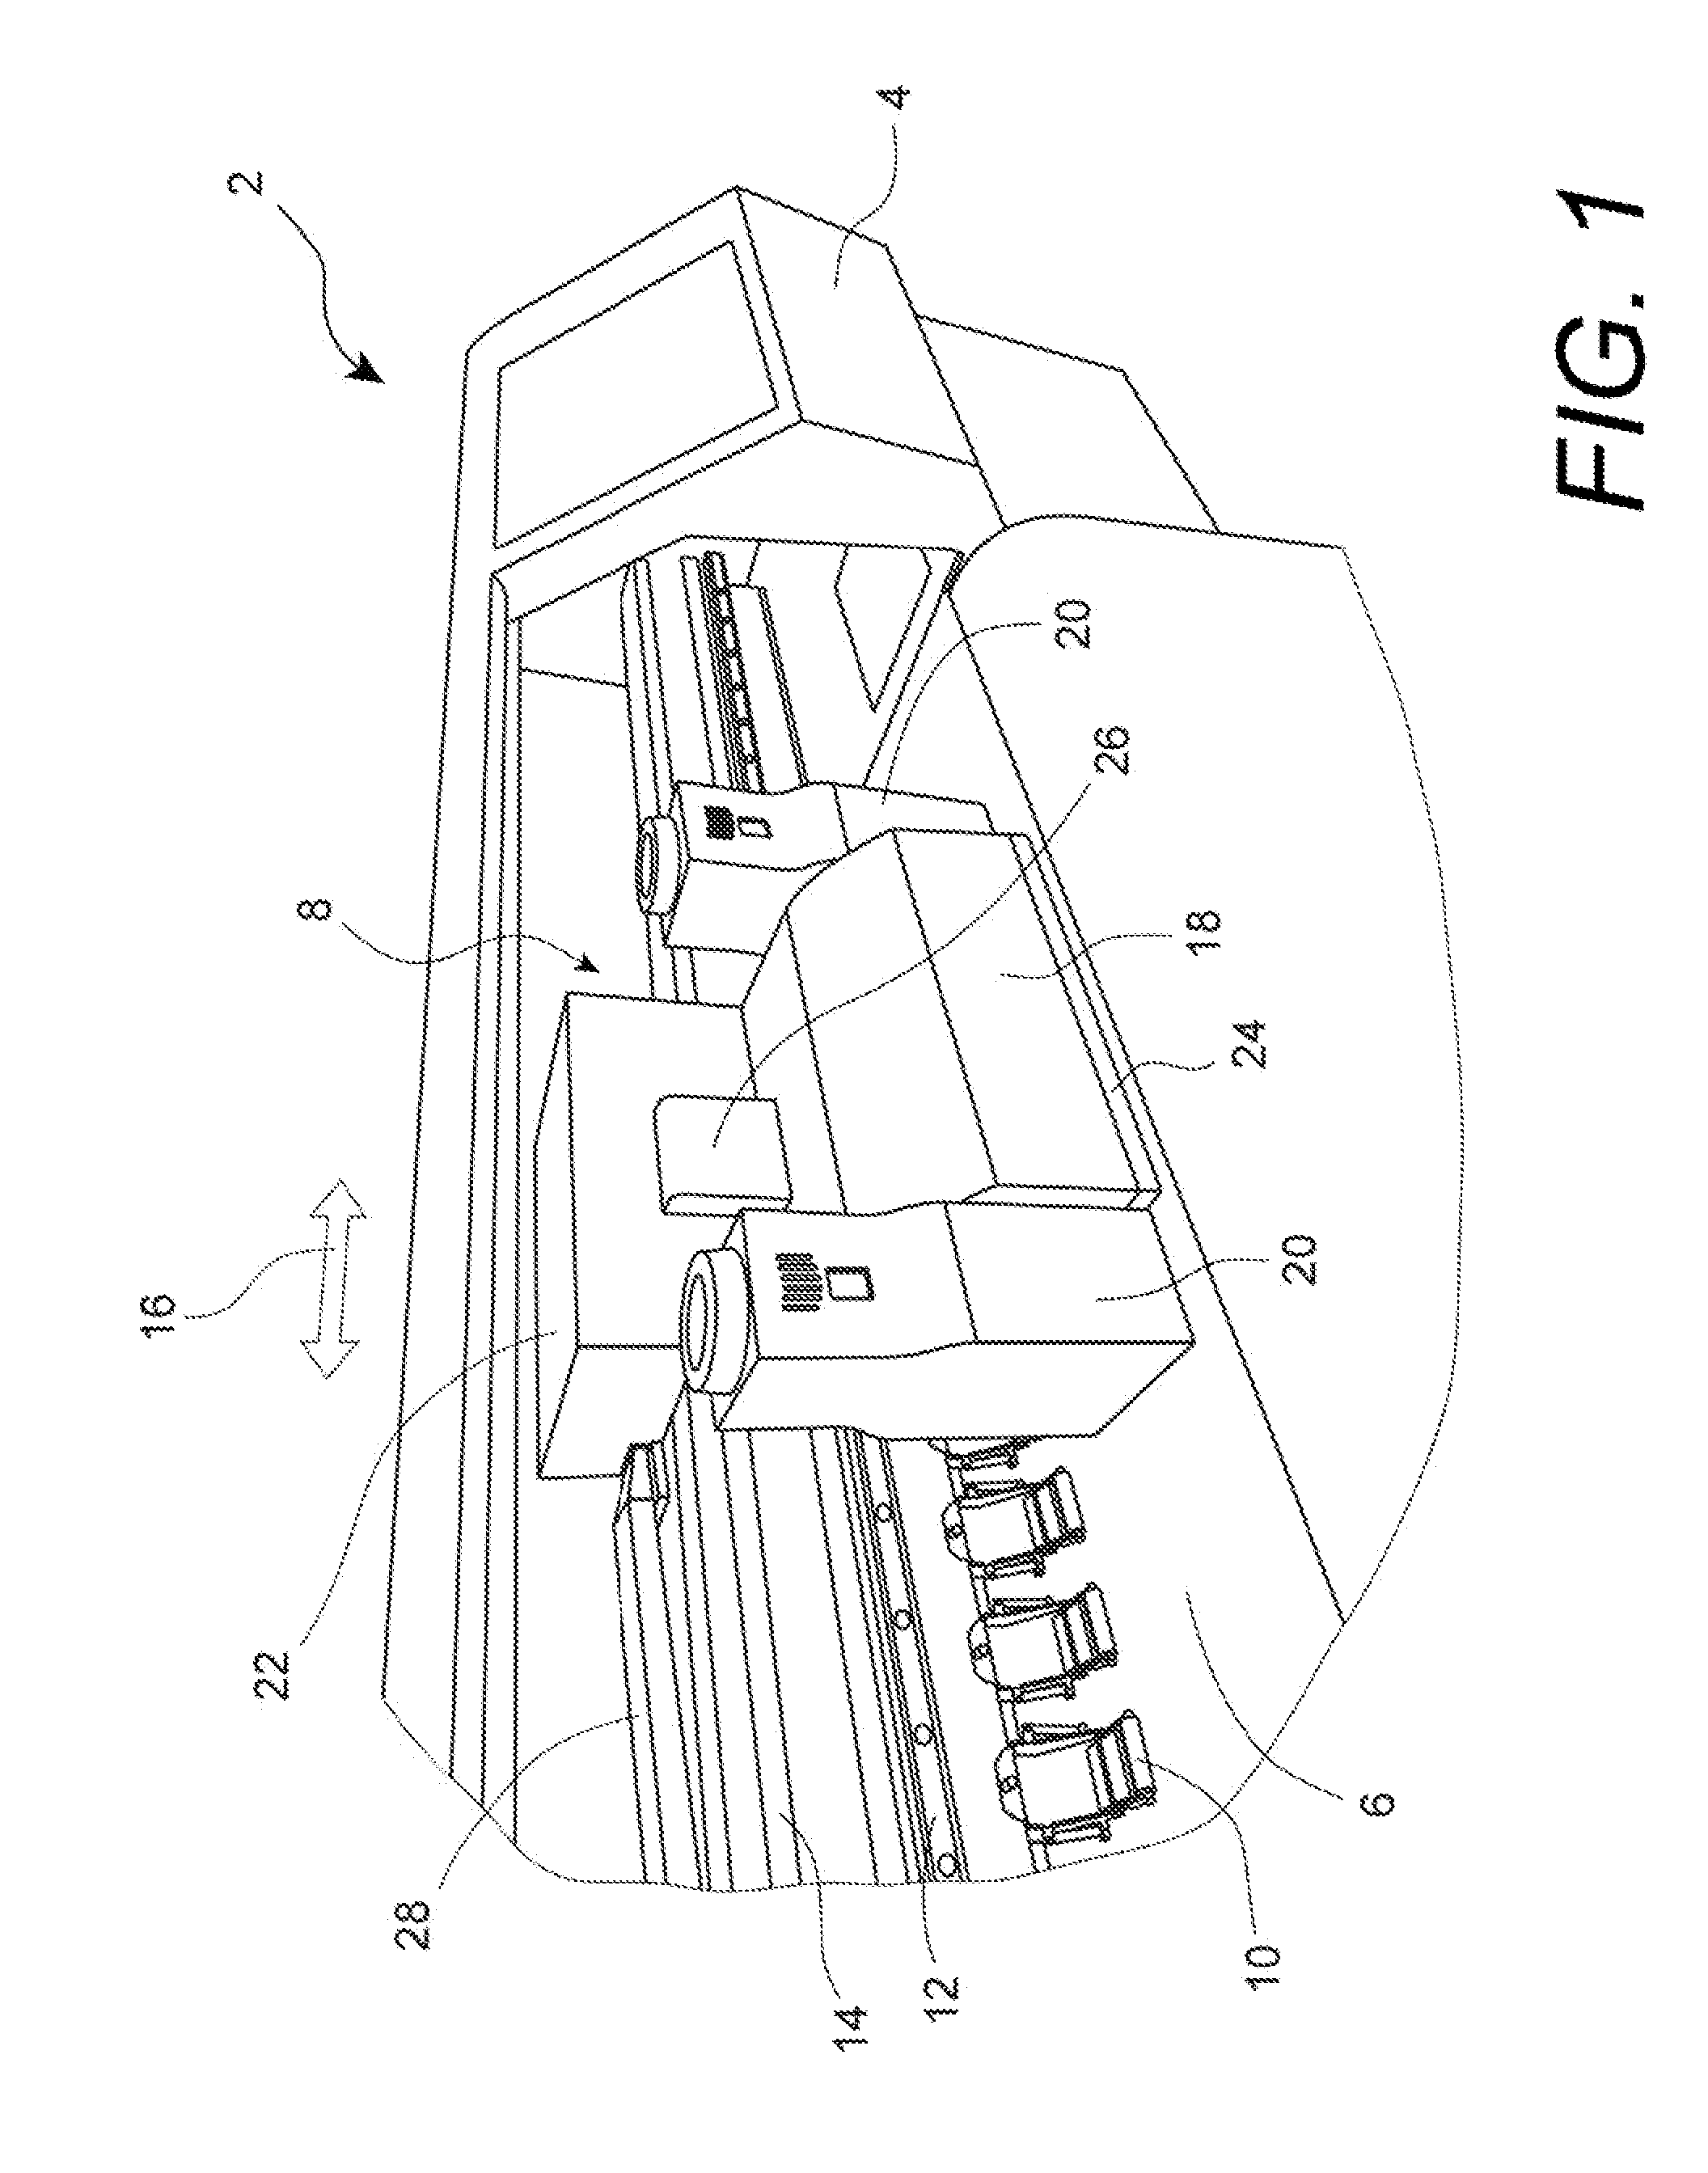 Method and system for printing untreated textile in an inkjet printer